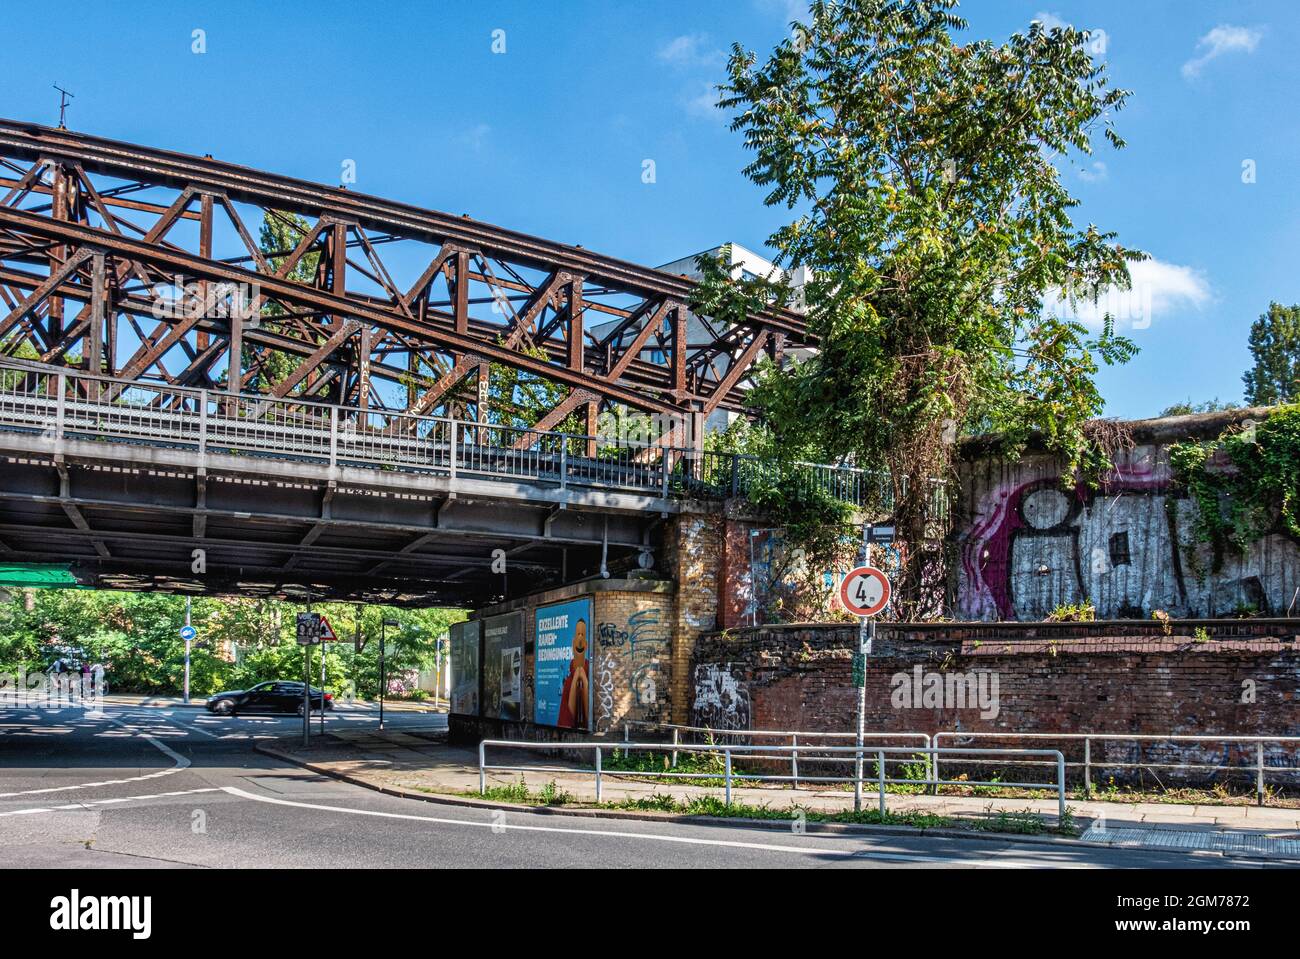 Historic old Liesen Bridge & Remnant of former Berlin Wall that divided city into East and West in Liesenstrasse, Mitte, Berlin Stock Photo